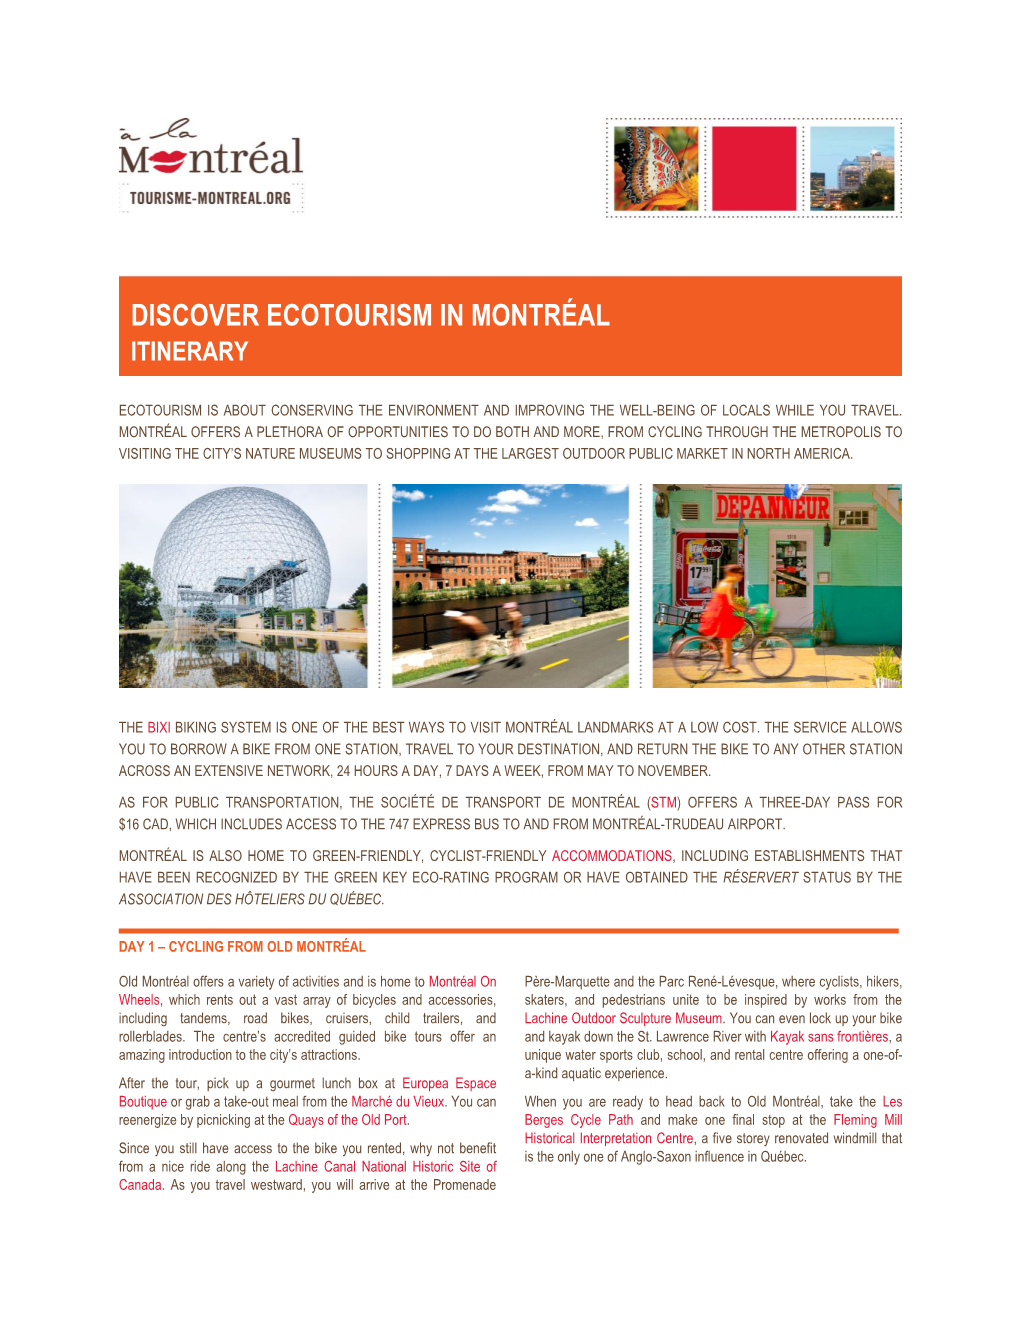 Discover Ecotourism in Montréal Itinerary